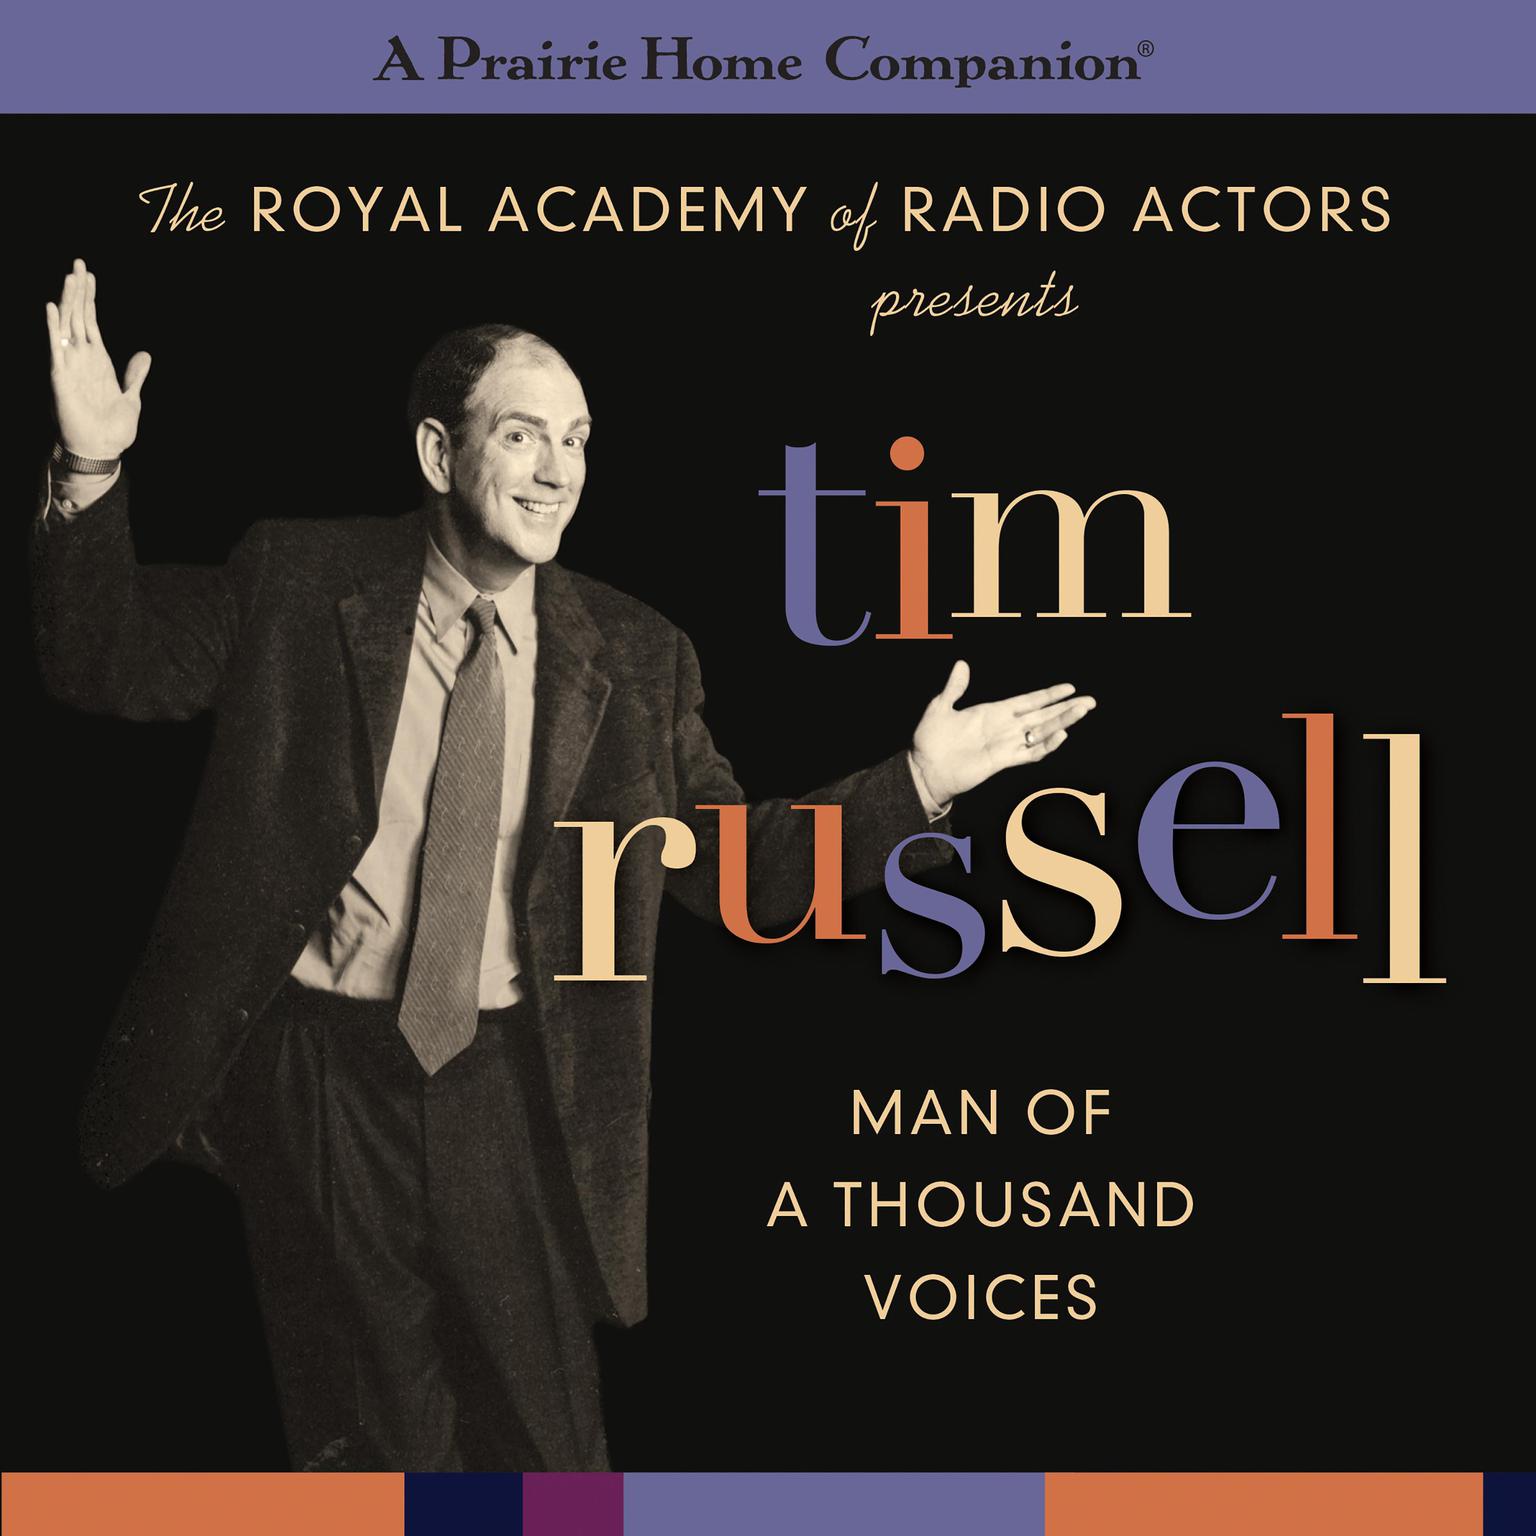 Tim Russell: Man of a Thousand Voices (A Prairie Home Companion) Audiobook, by Garrison Keillor